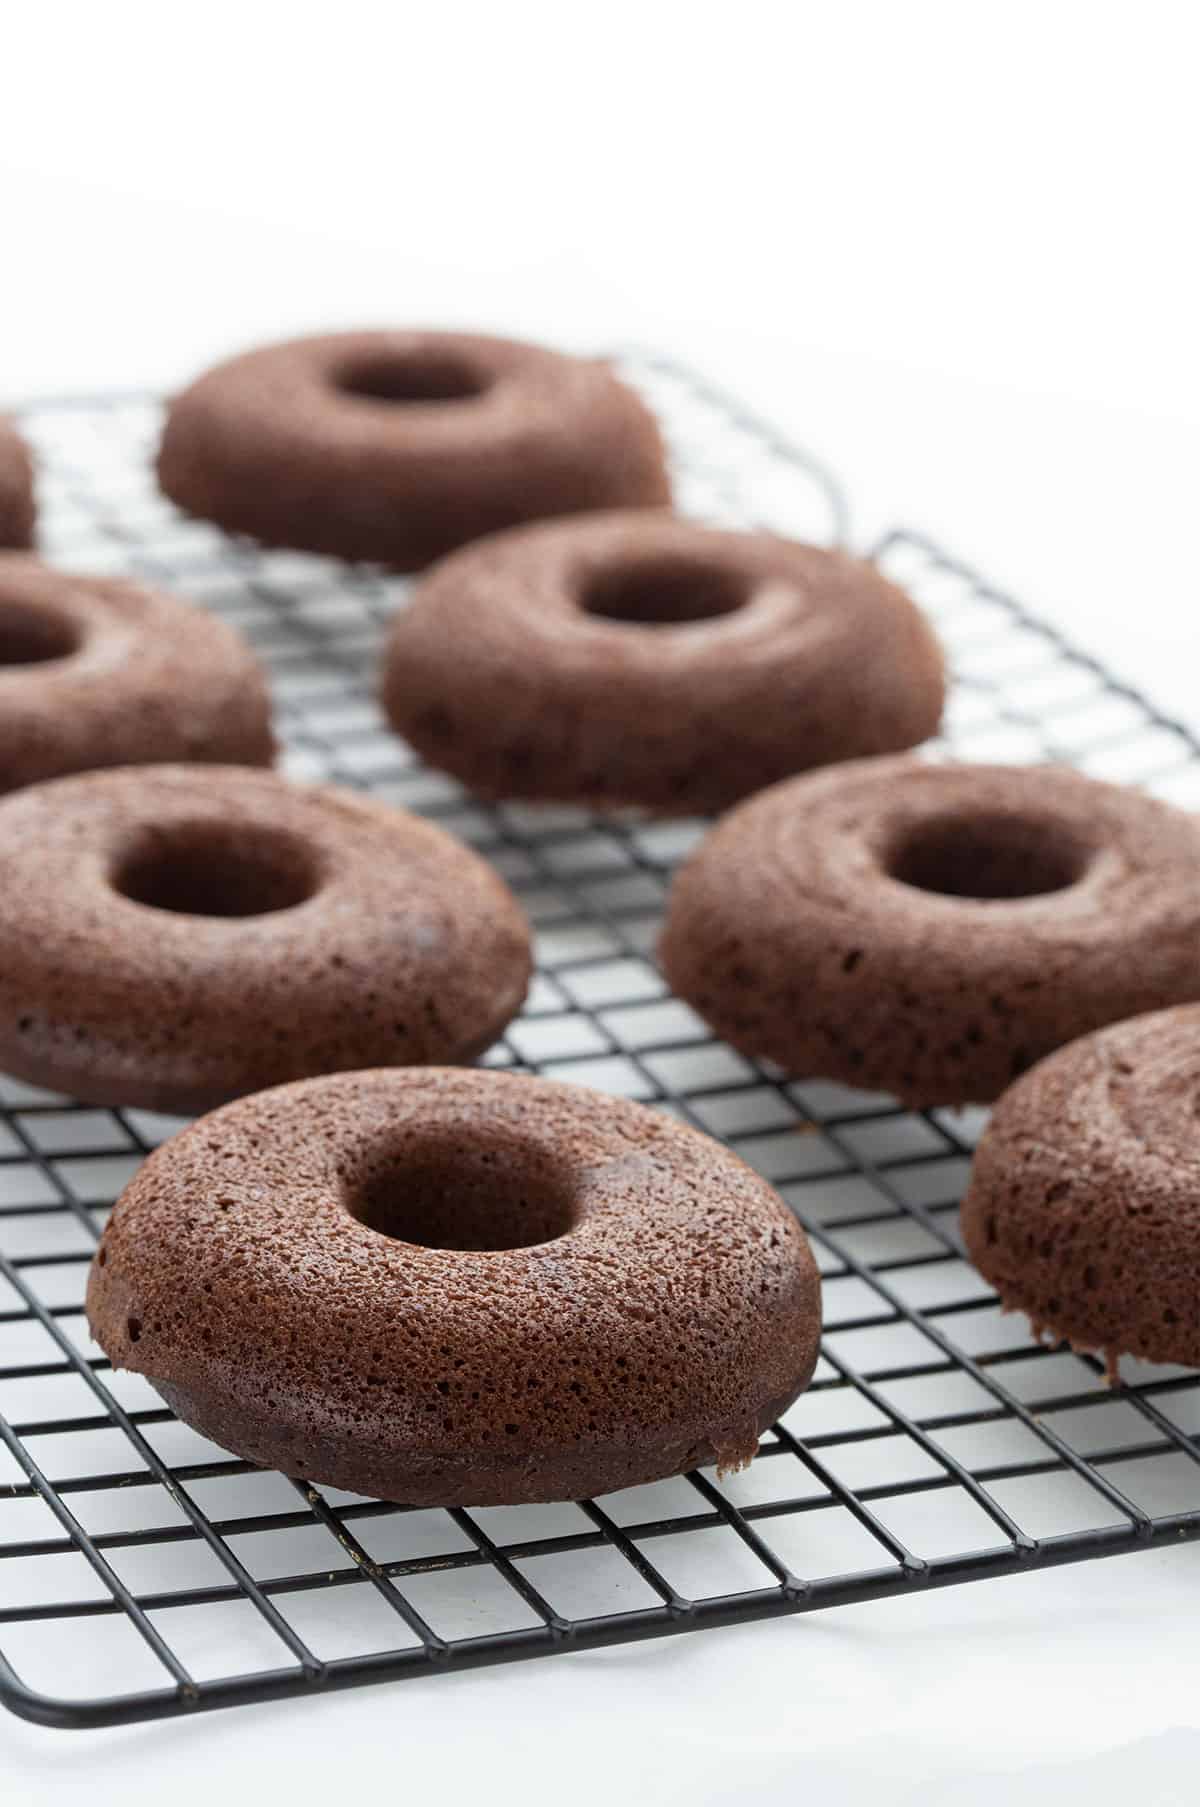 Keto chocolate donuts cooling on a rack over a white table. 